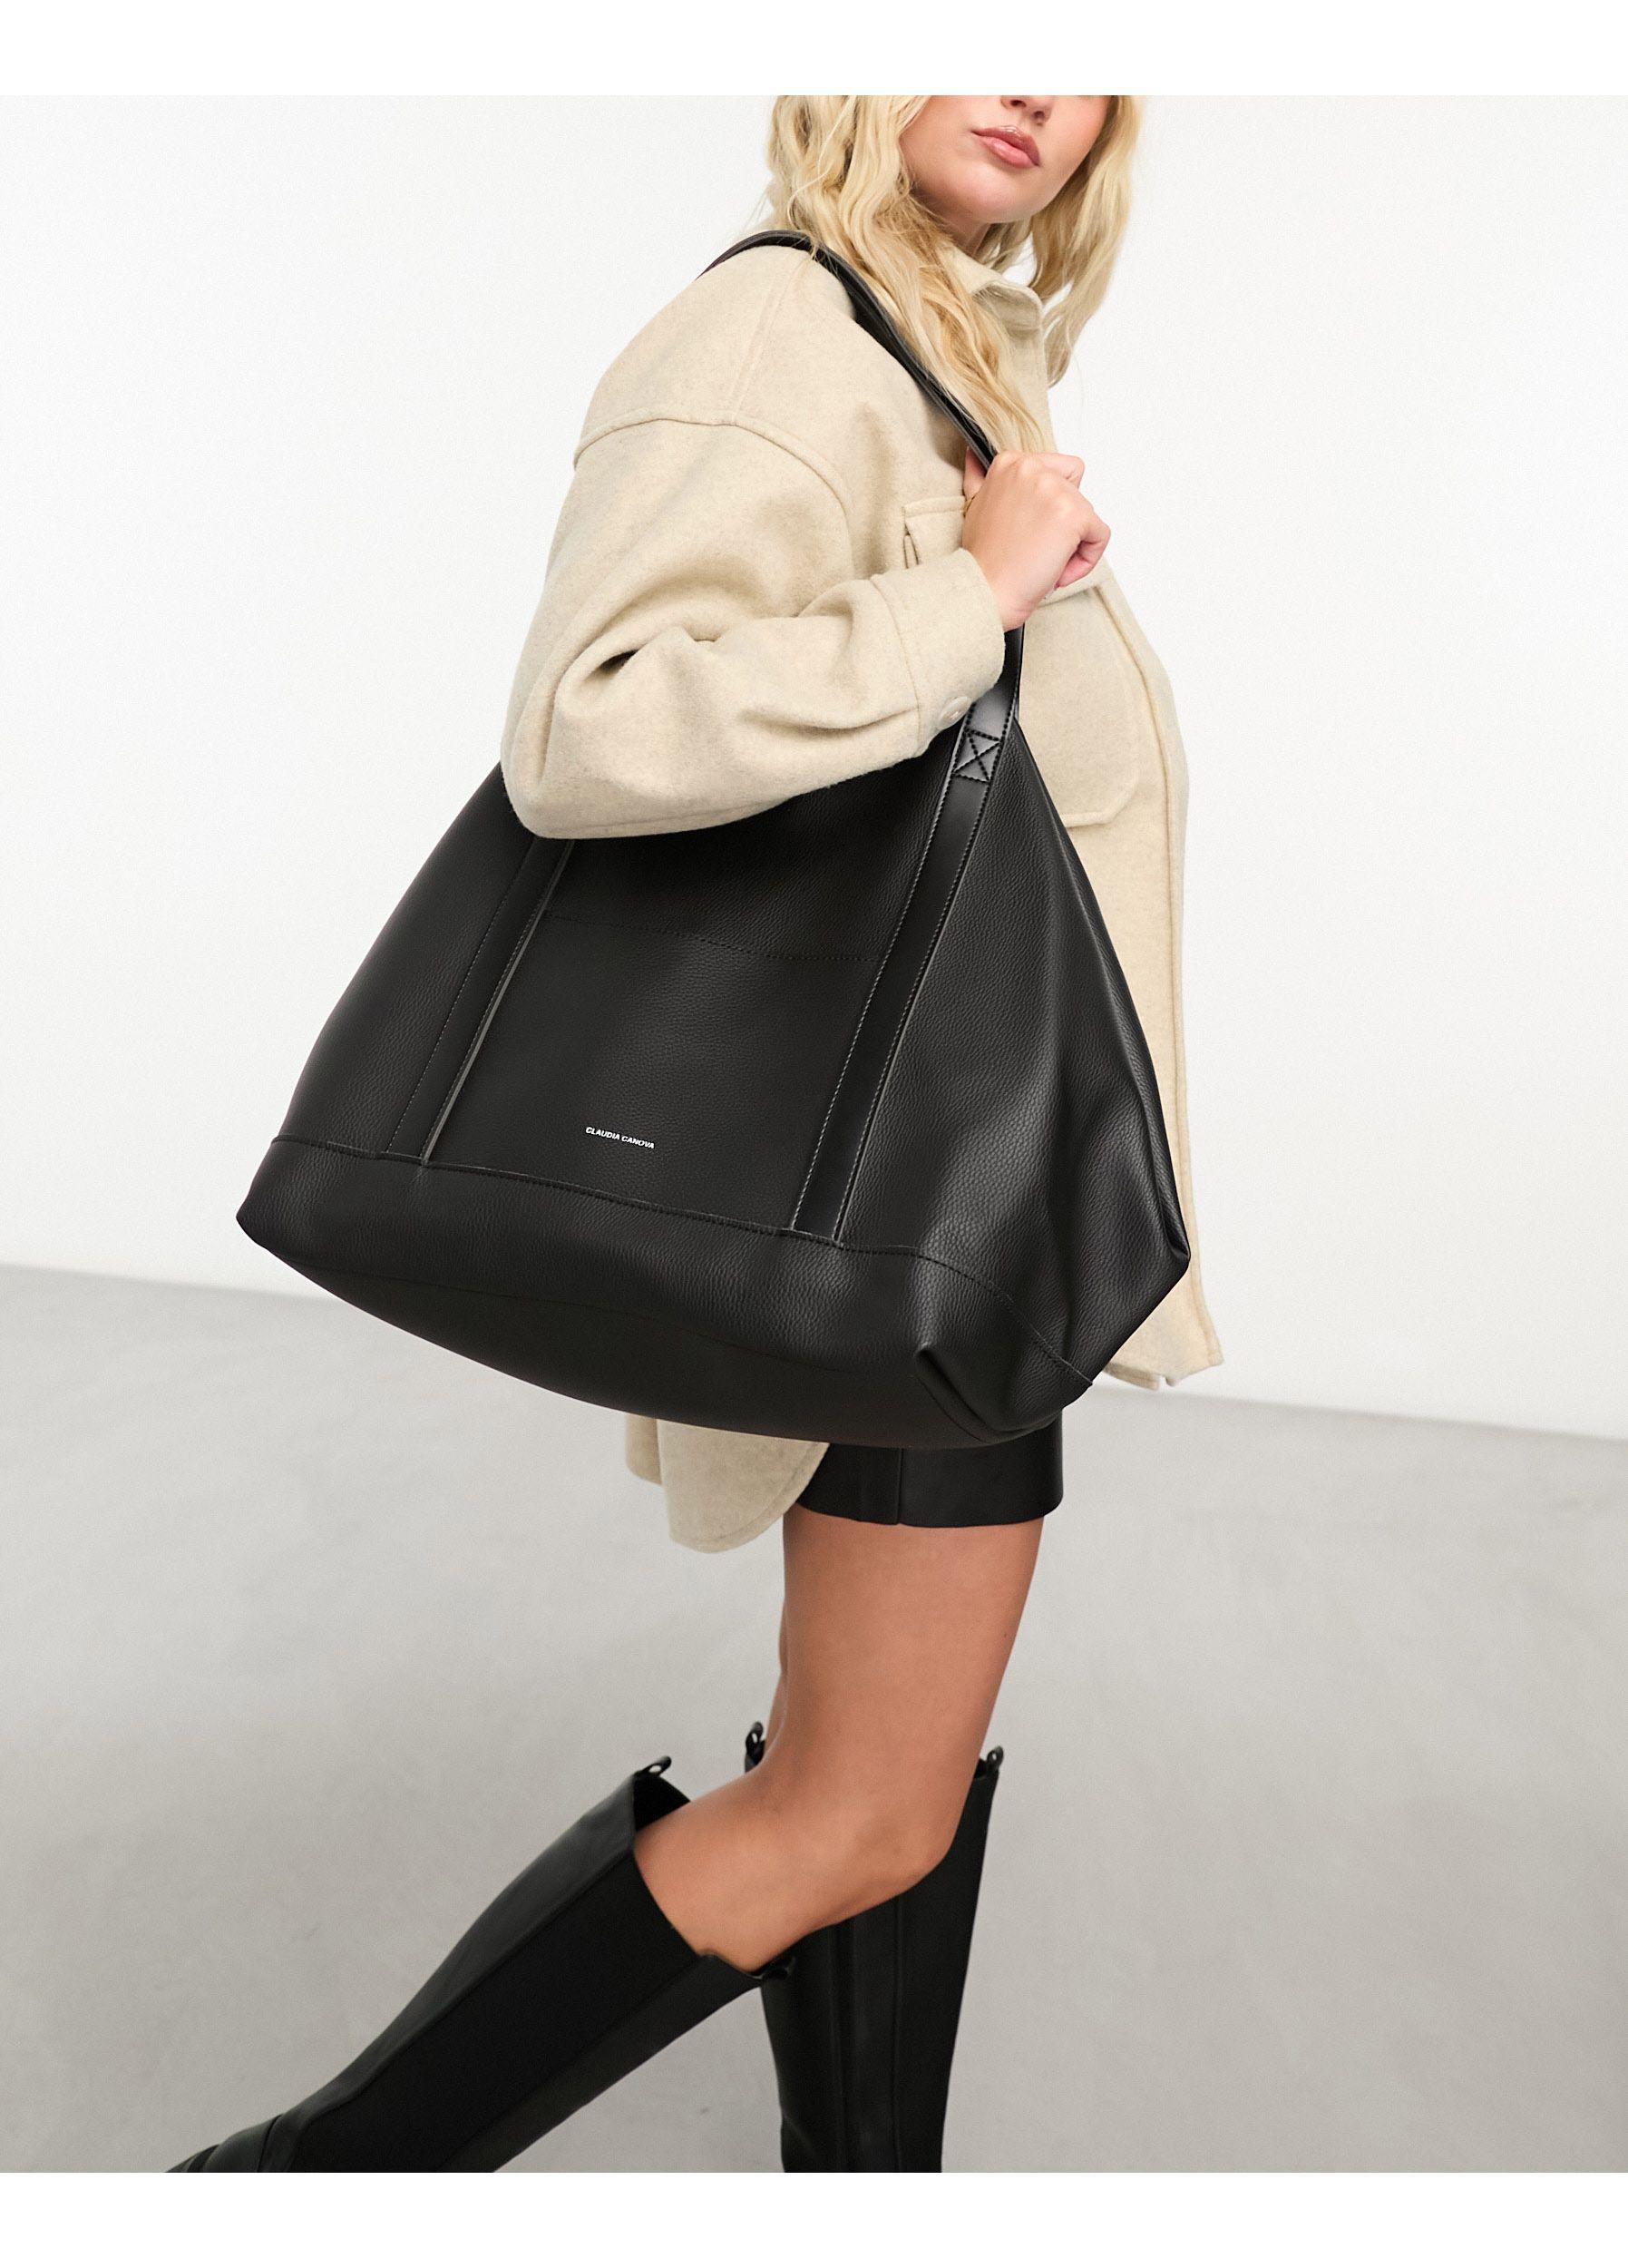 Claudia Canova Slouchy Oversized Tote Bag in Black | Lyst